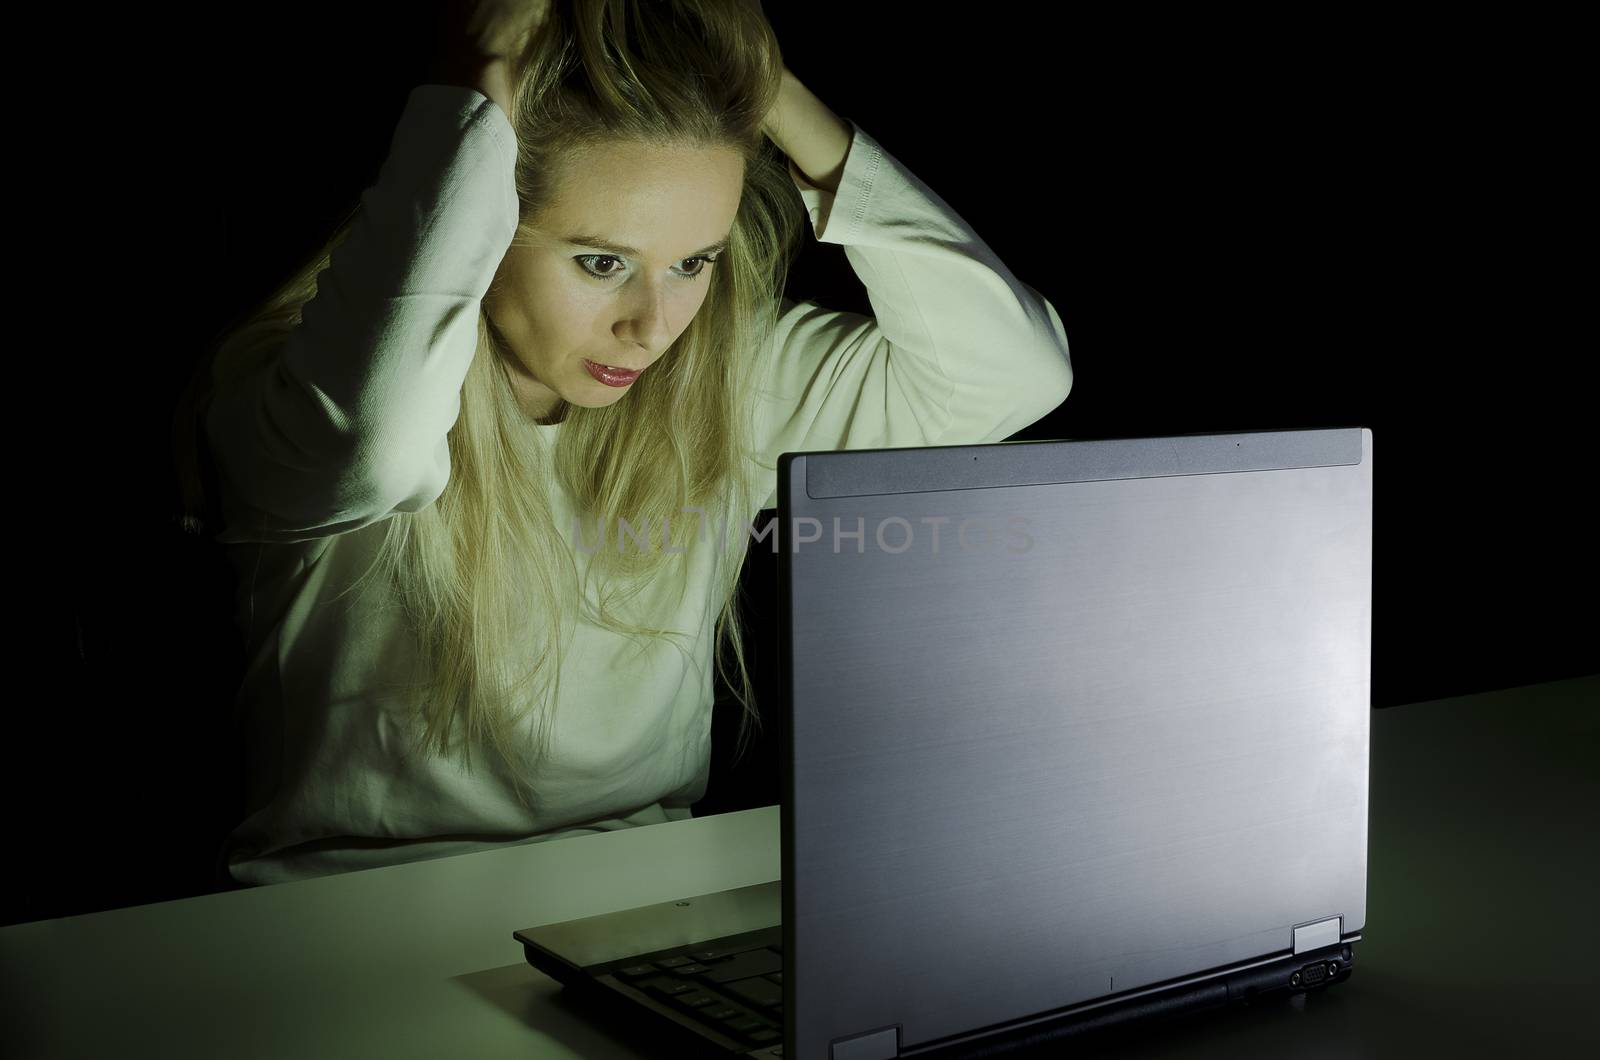 woman working on a computer by night in a dark room with only light from computer falling on her face pulling her hair in frustration